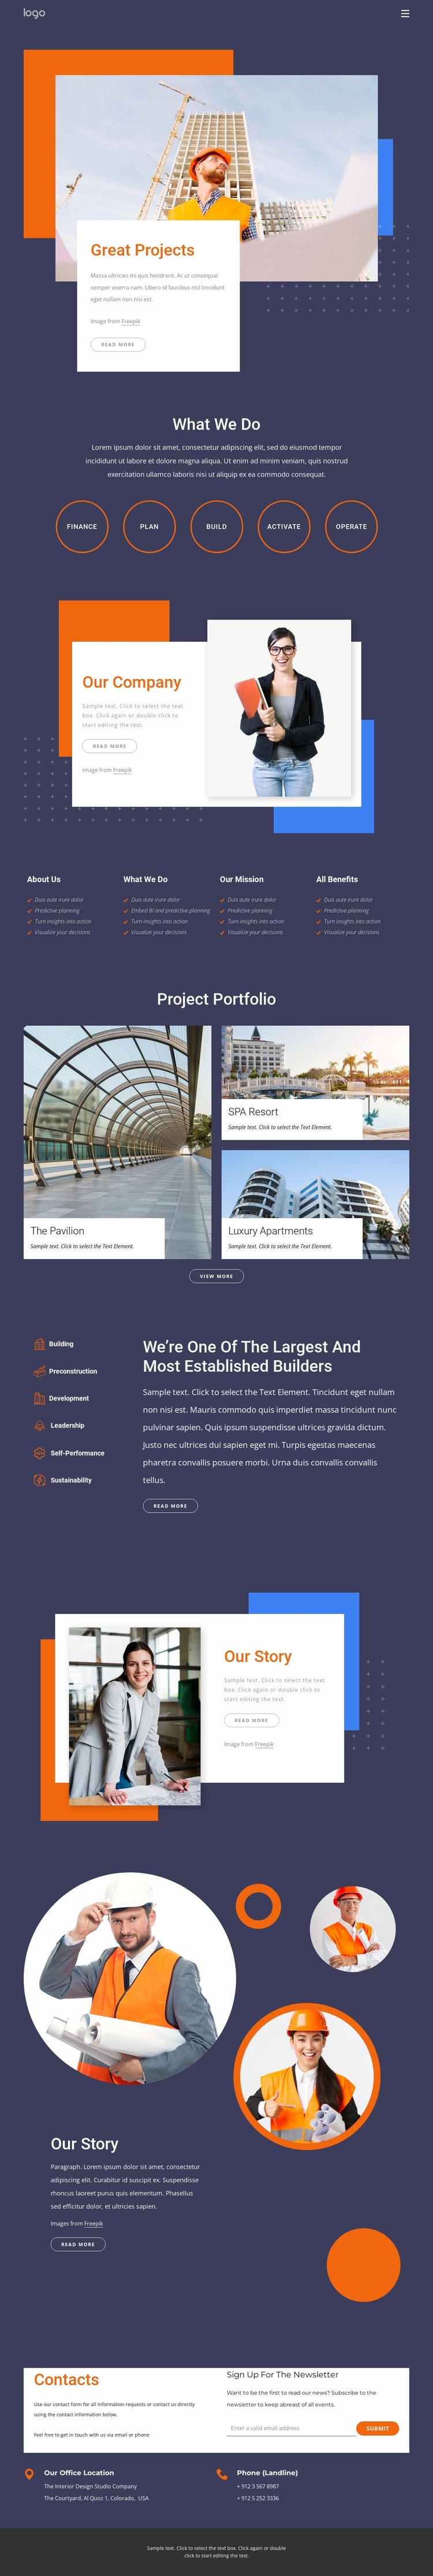 We specialise in delivering large complex building projects Website Template